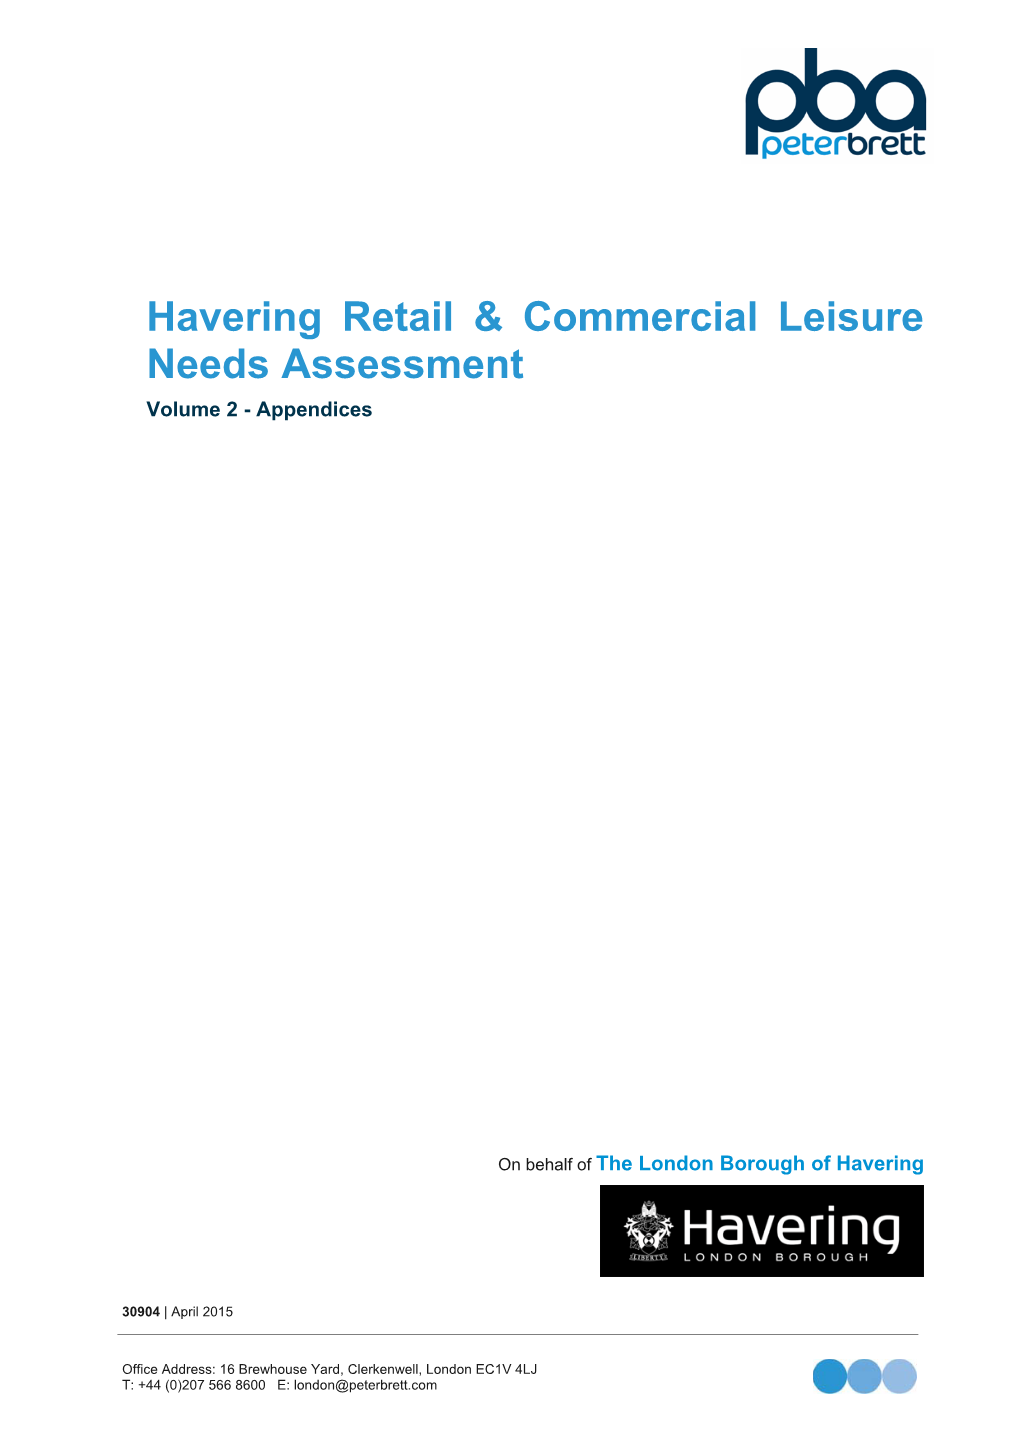 Download LBHLP.21.2 Havering Retail & Commercial Leisure Needs